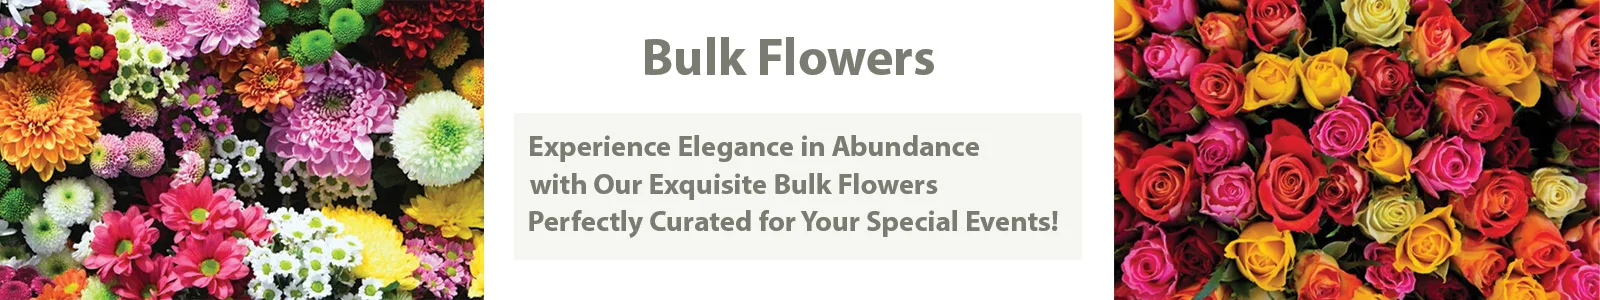 Beautiful bulk flowers in vibrant colors, perfect for weddings and events - experience unmatched ele